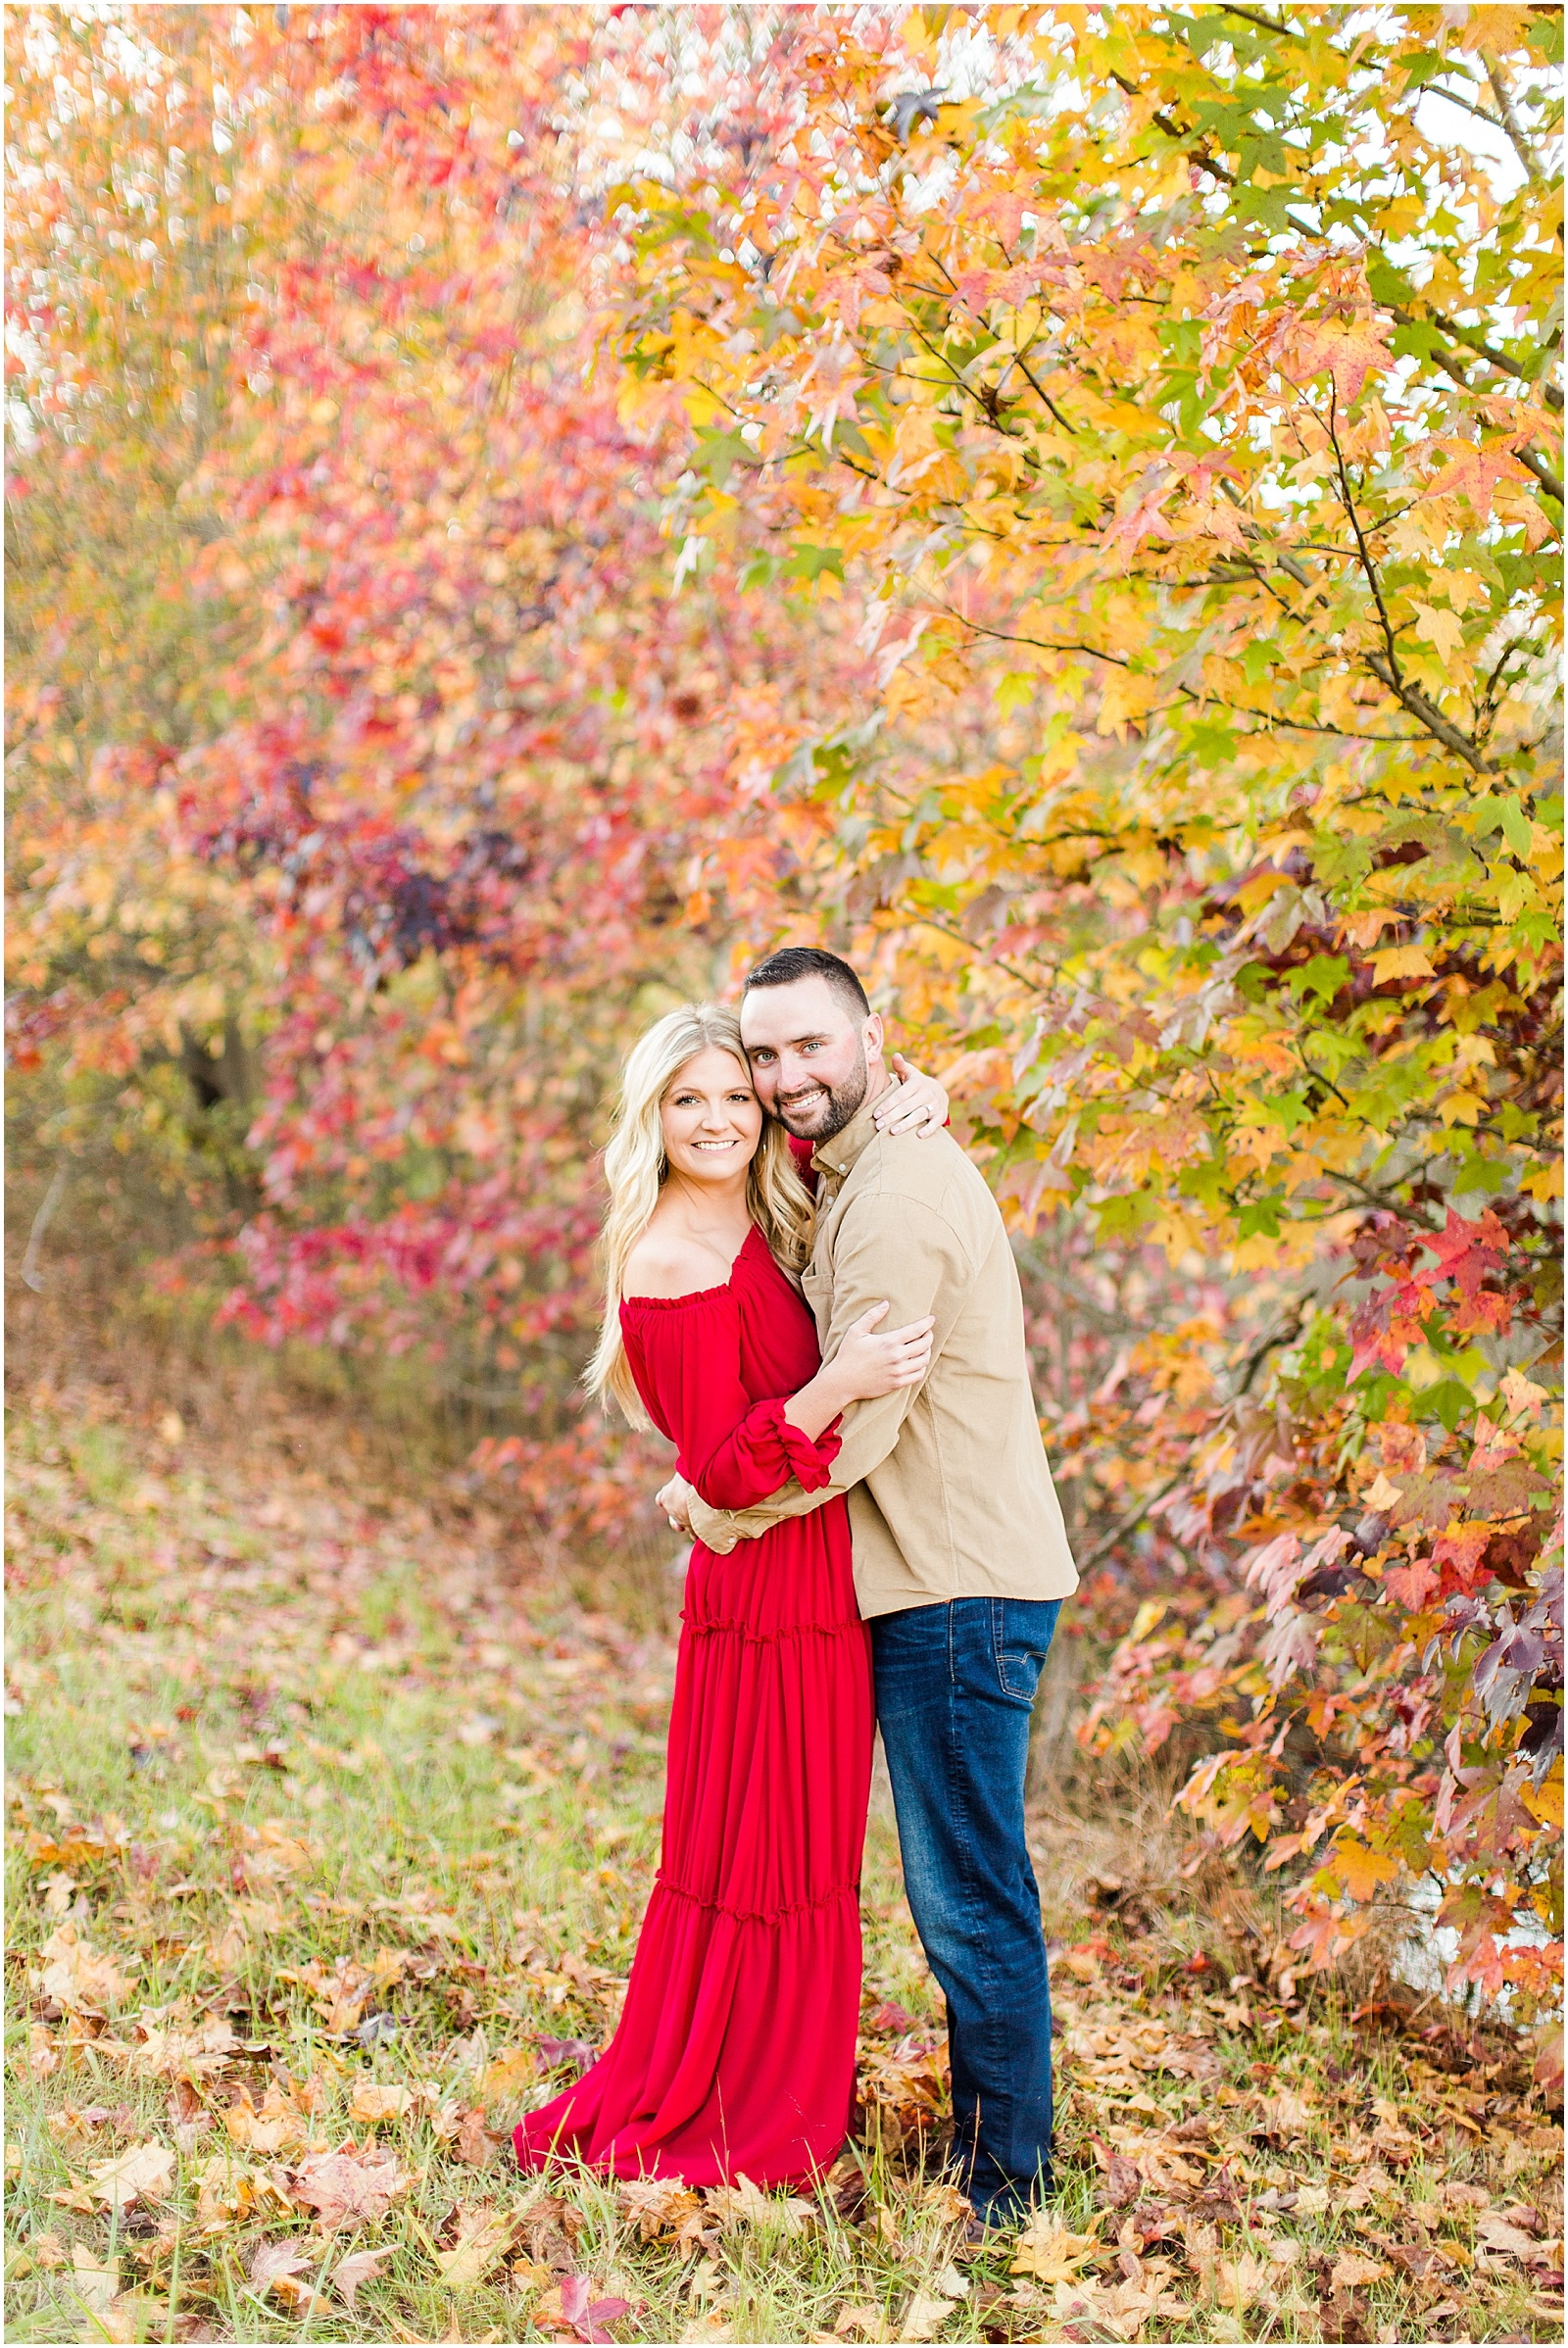 A Southern Indiana Engagement Session | Charleston and Erin | Bret and Brandie Photography036.jpg